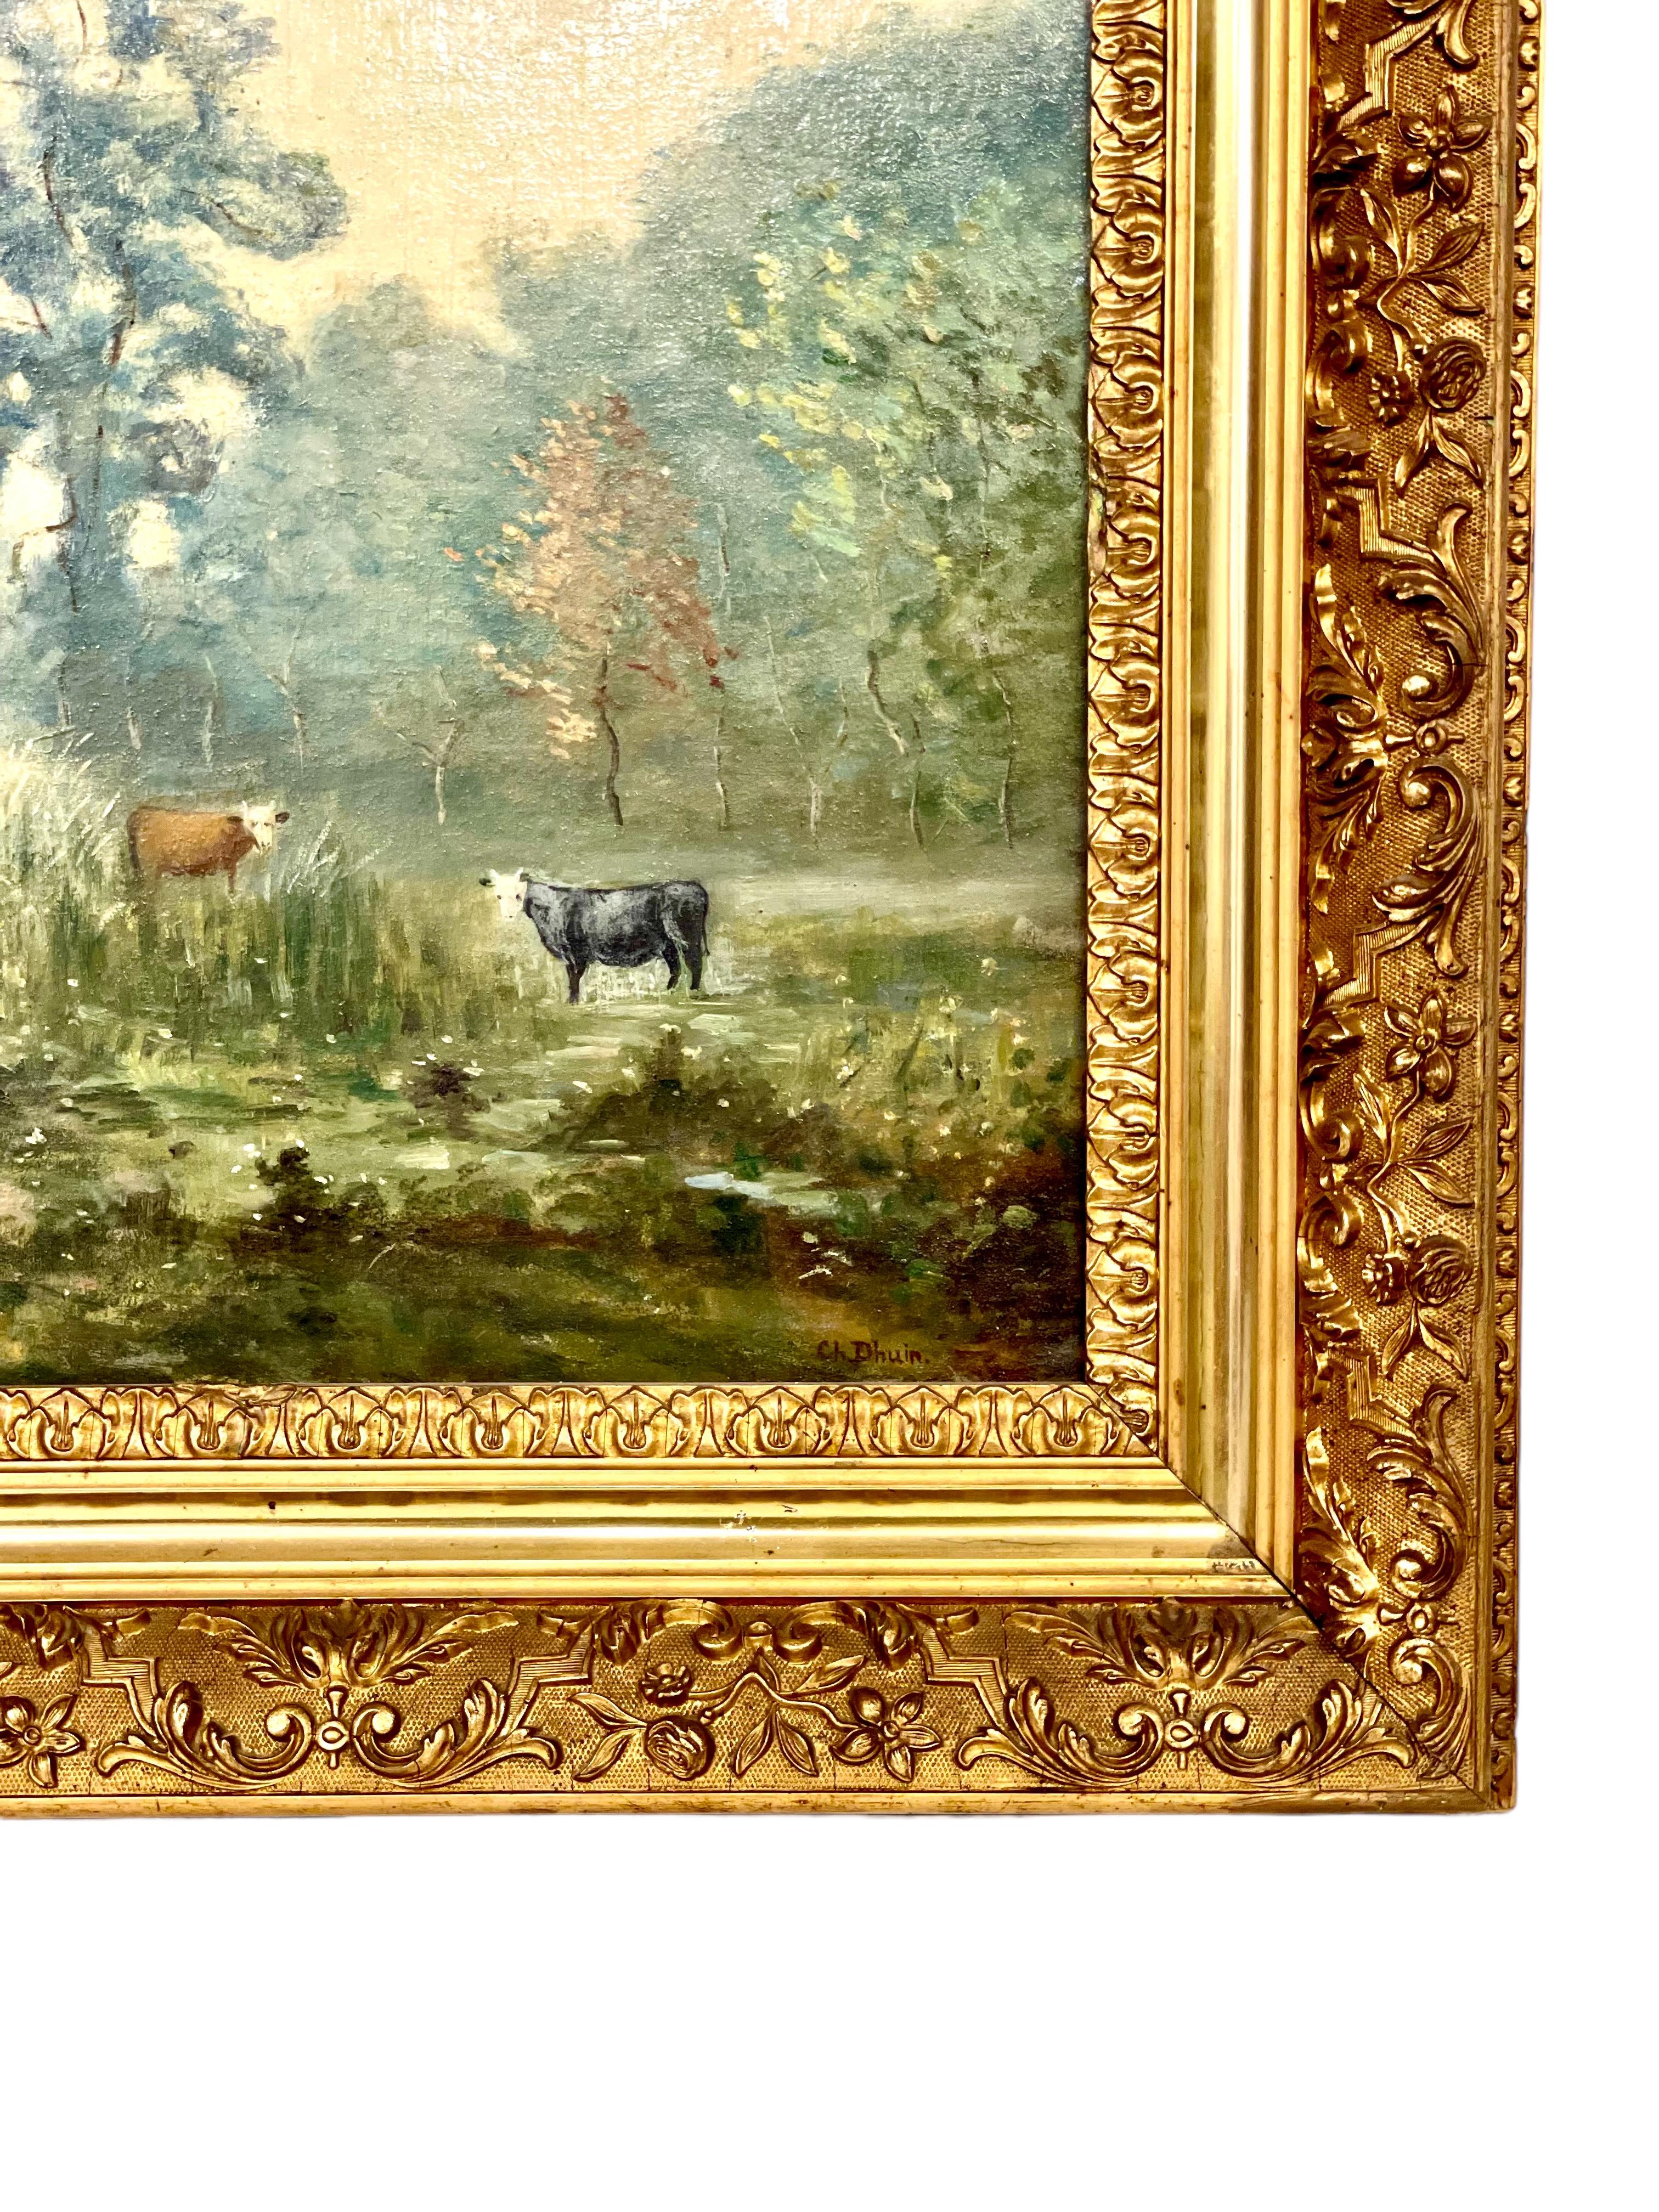 French Provincial Large Oil on Panel: 'The Cowherder by the Pond', by Charles Dhuin For Sale